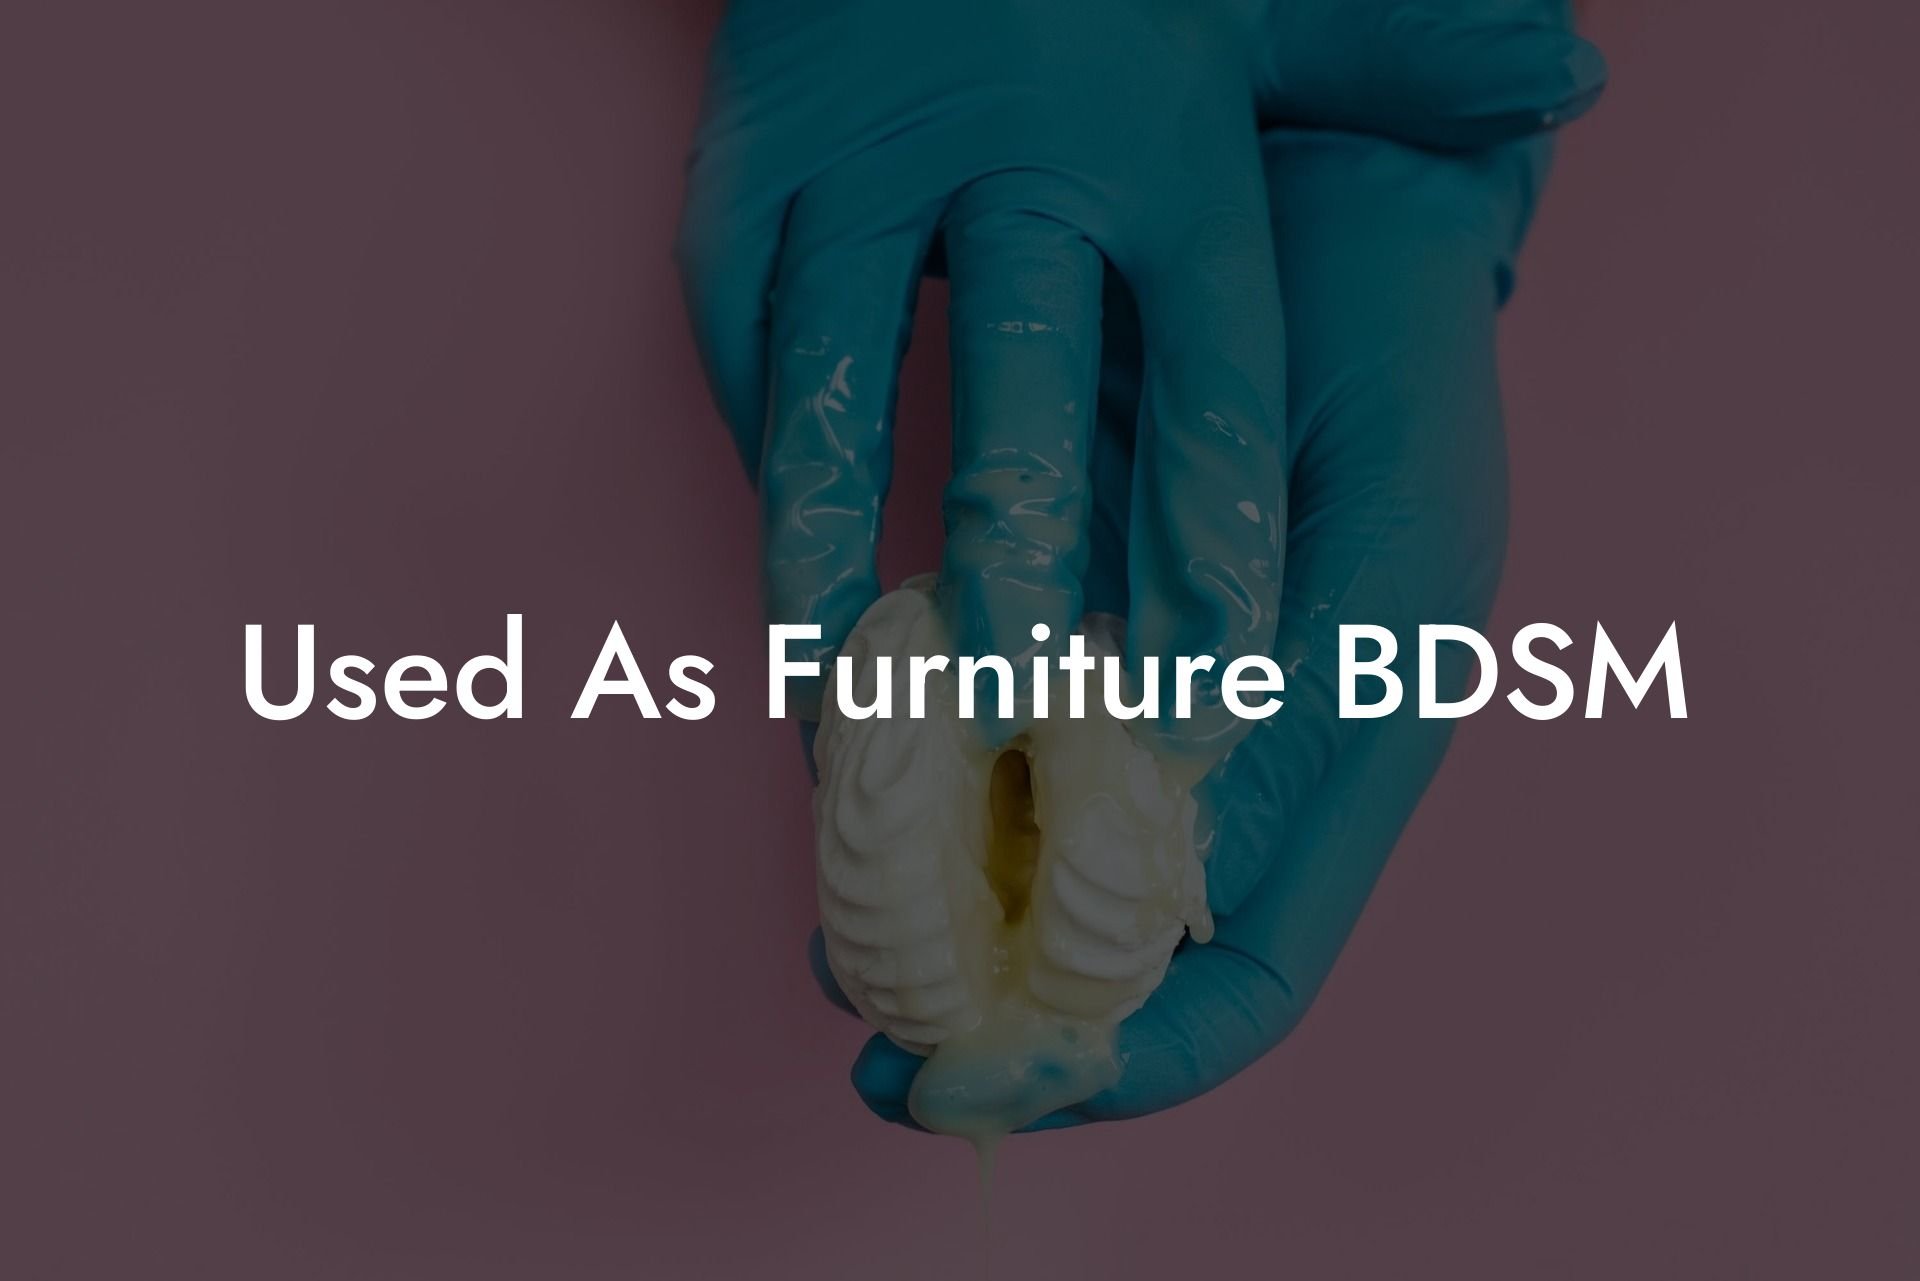 Used As Furniture BDSM